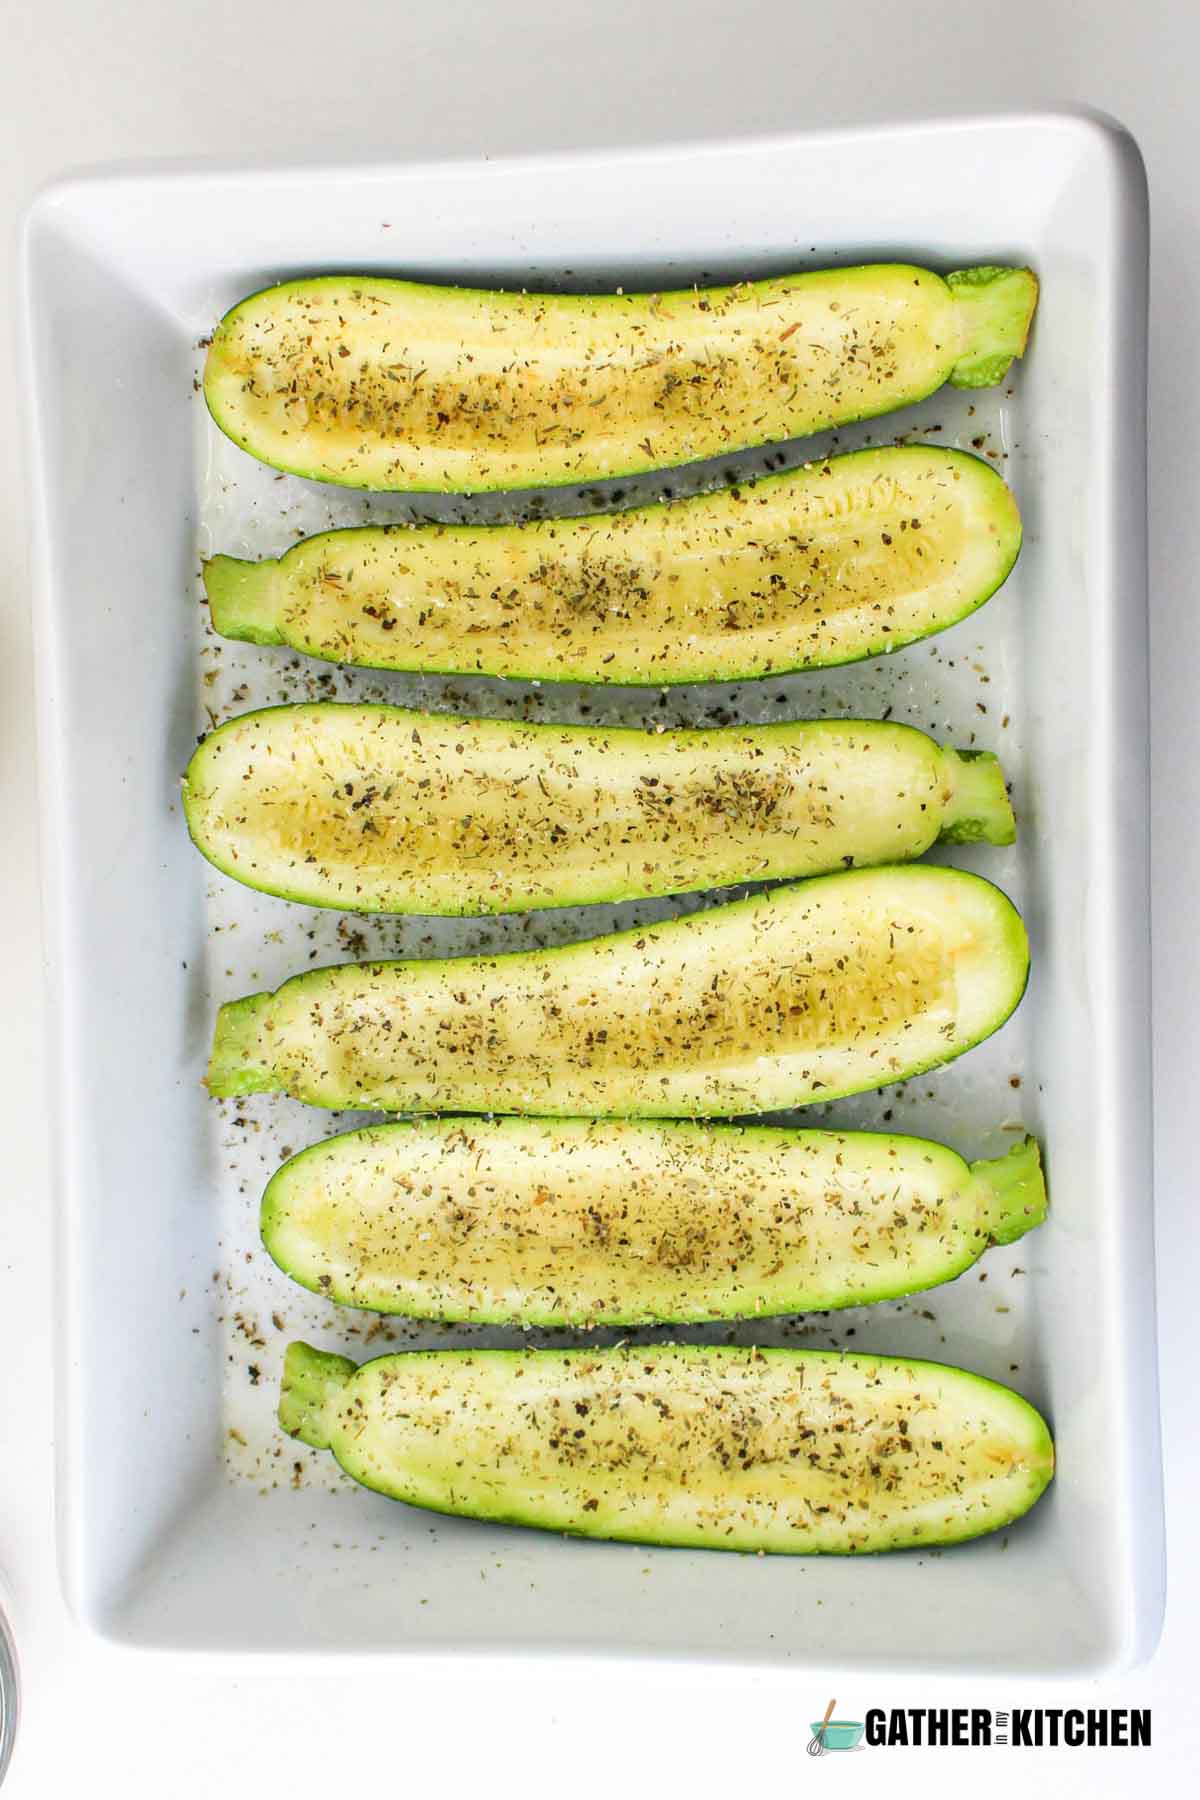 Zucchinis drizzled with olive oil and sprinkled with salt and pepper.